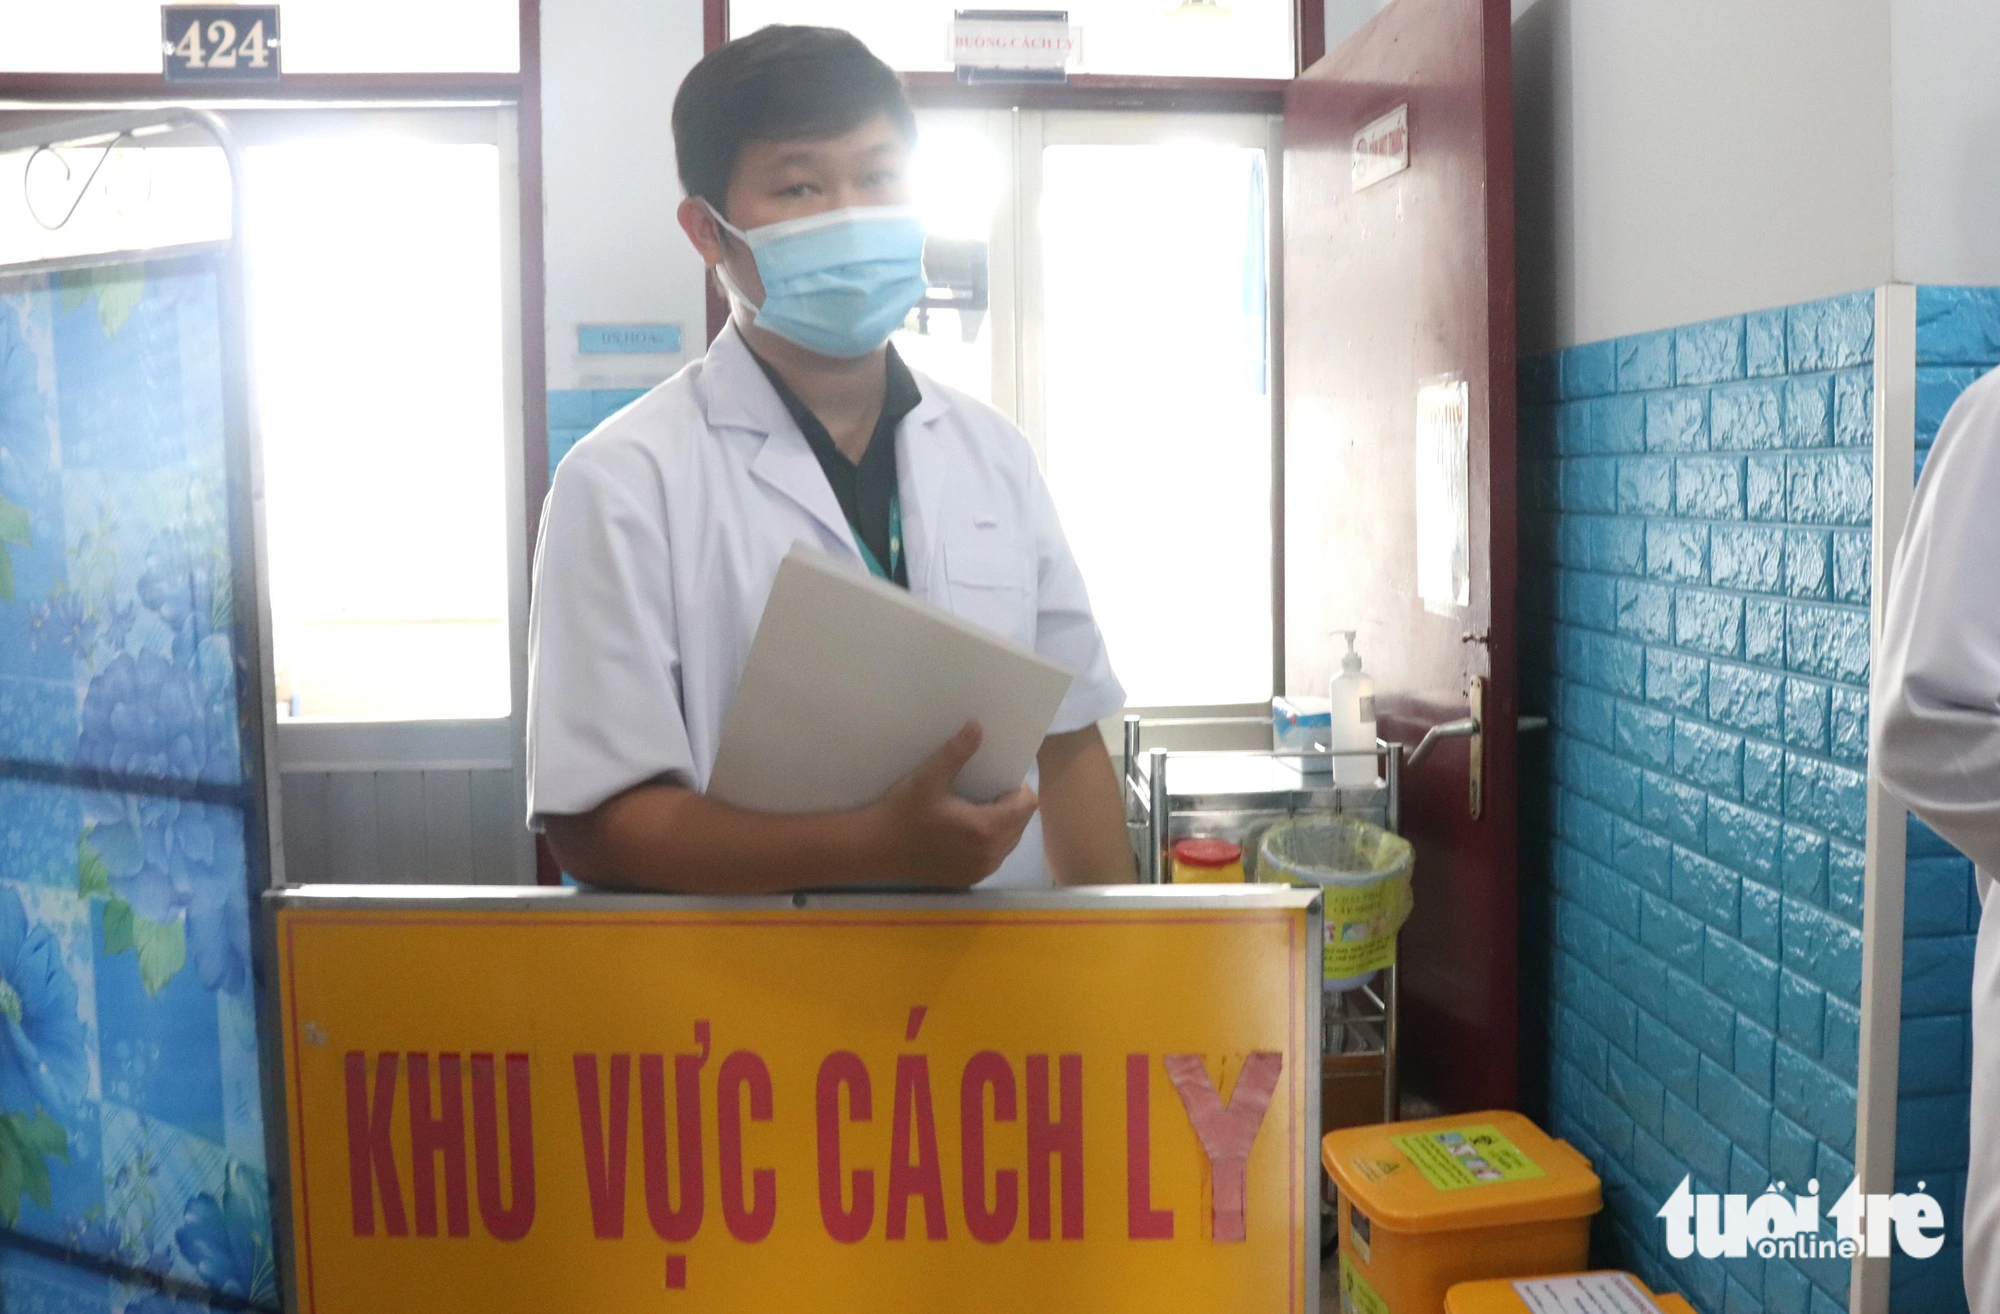 6 new monkeypox cases registered in Ho Chi Minh City